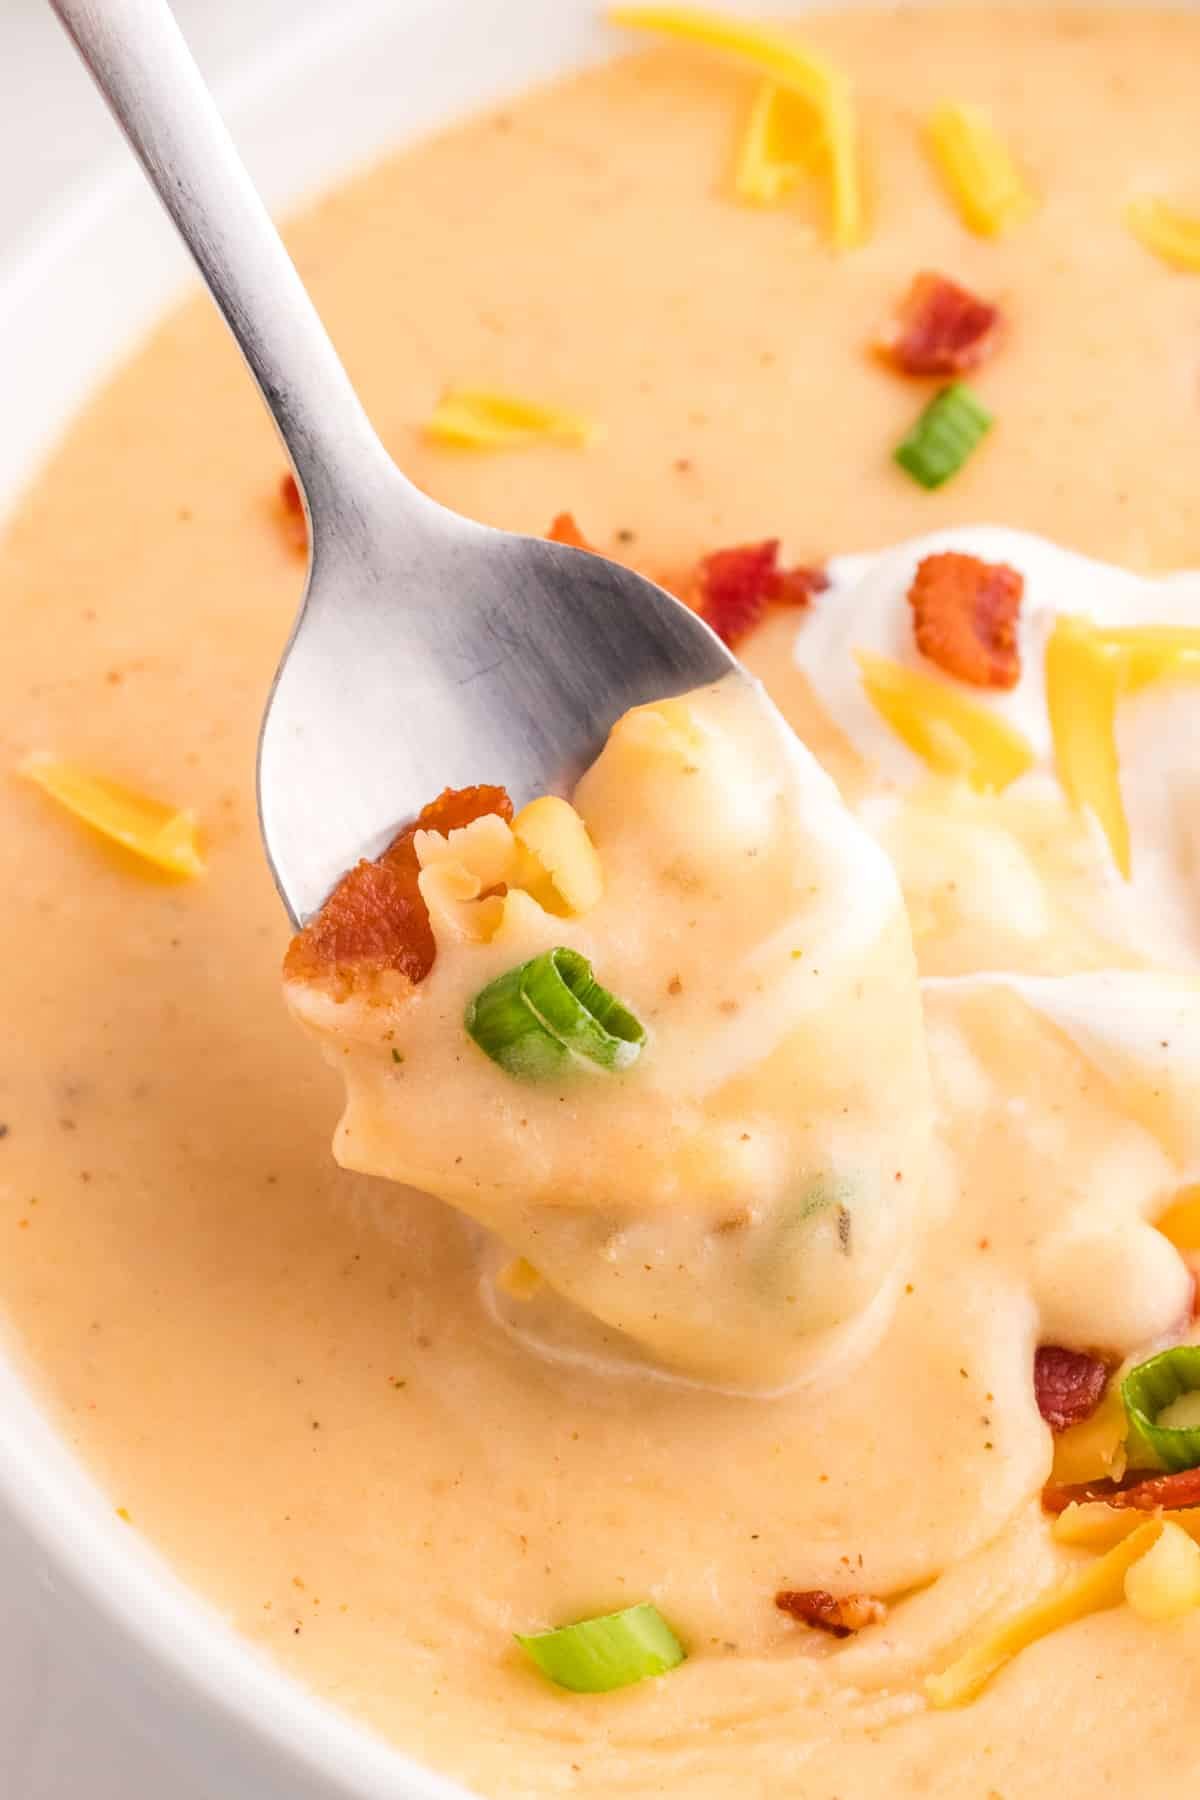 A spoon taking a portion of potato soup, garnished with green onions and bacon.